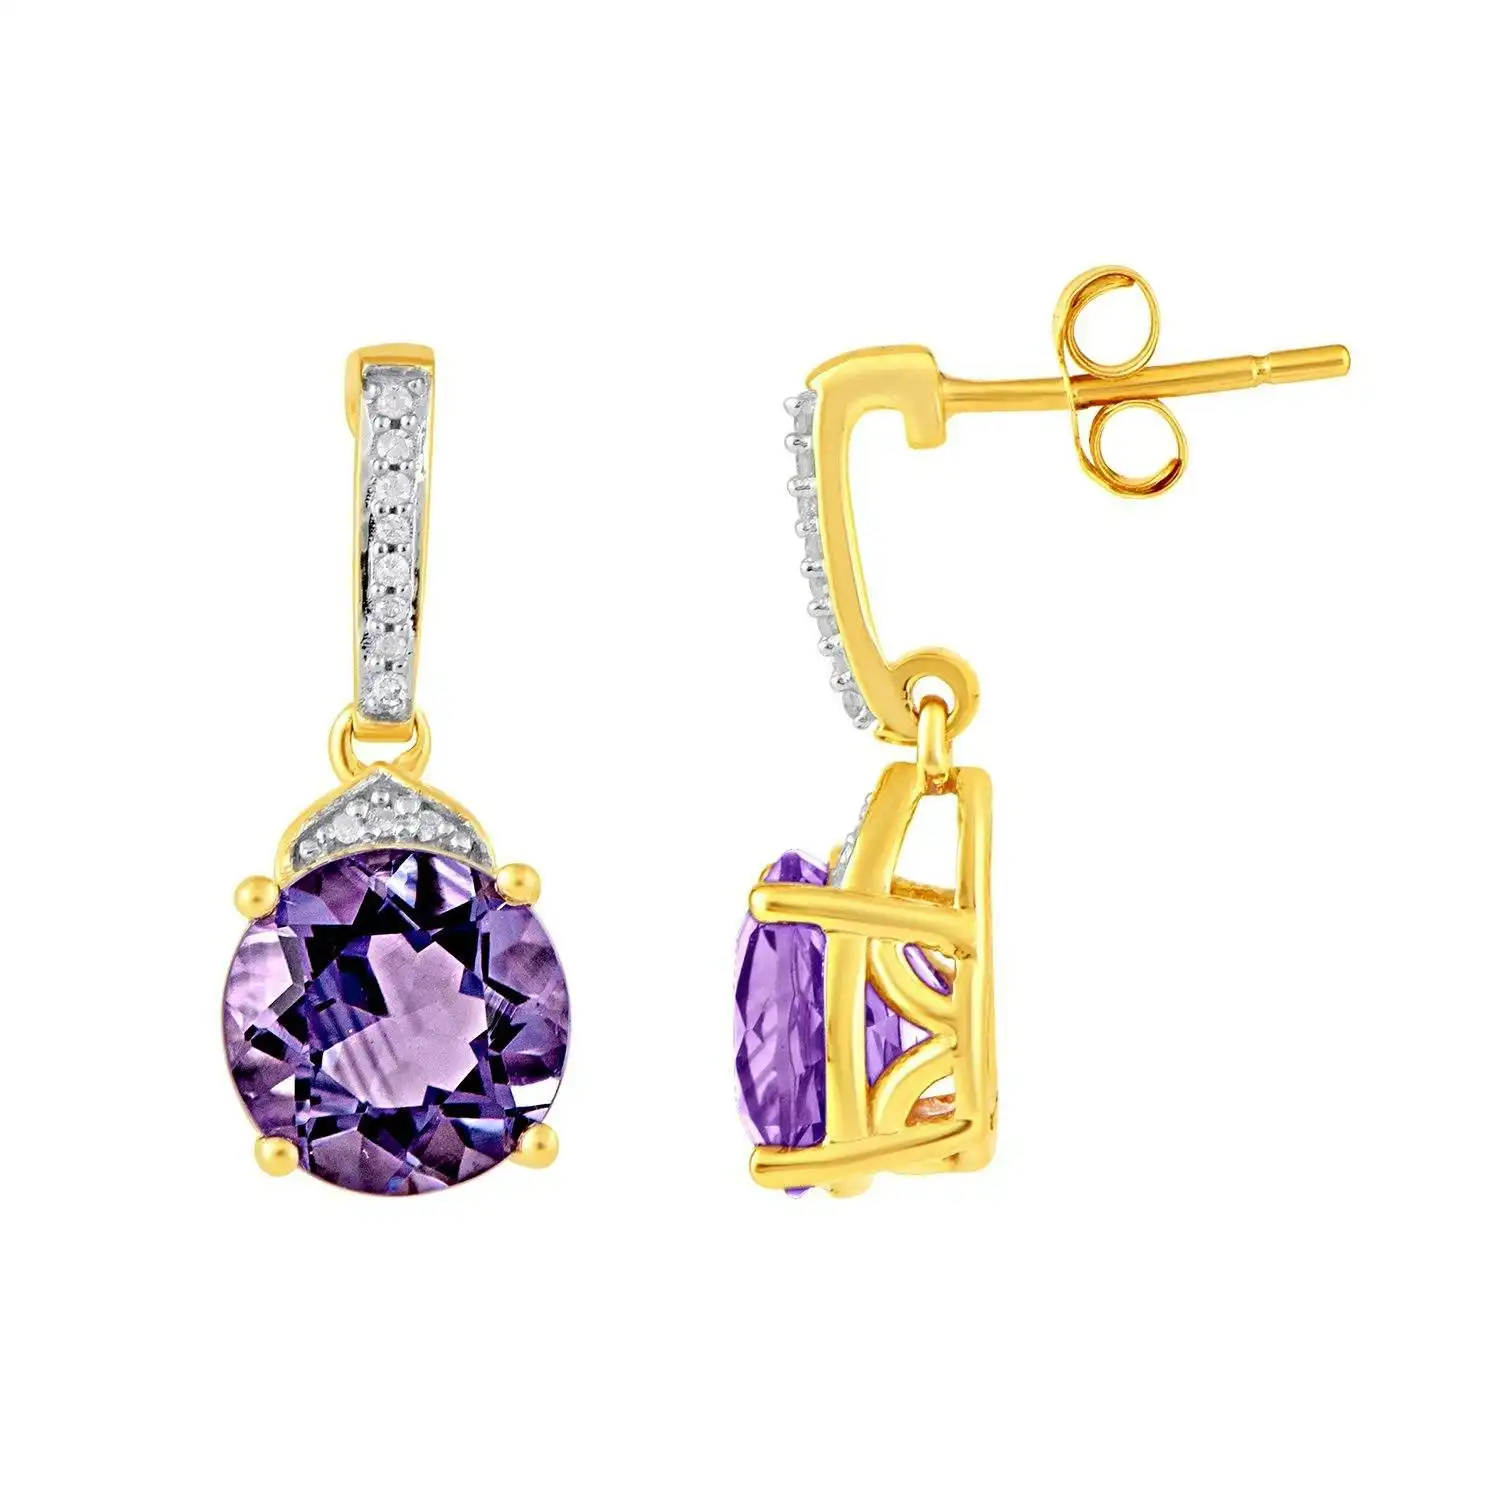 Diamond Set Stud Earrings with Amethyst in 9ct Yellow Gold